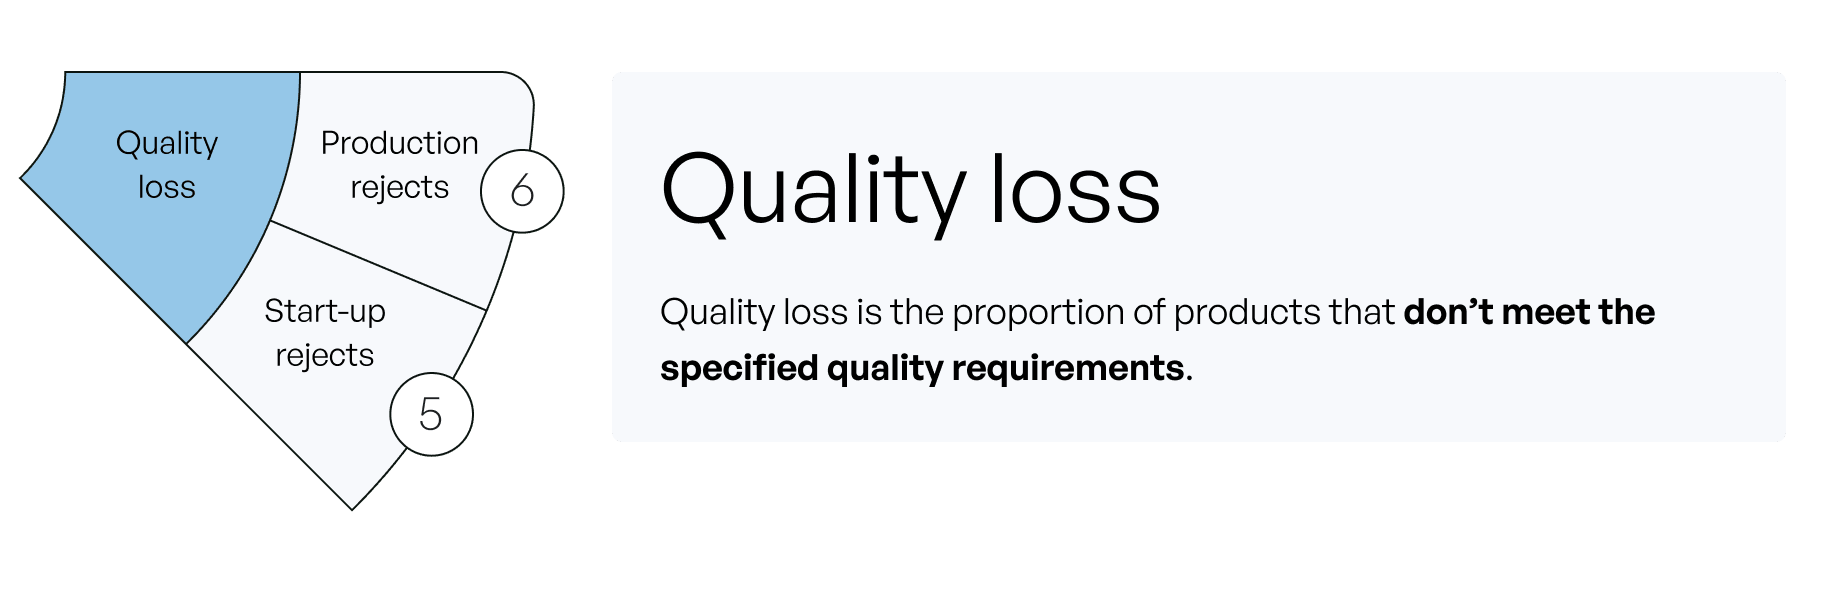 quality loss is proportion of products that don't meet specified quality requirements